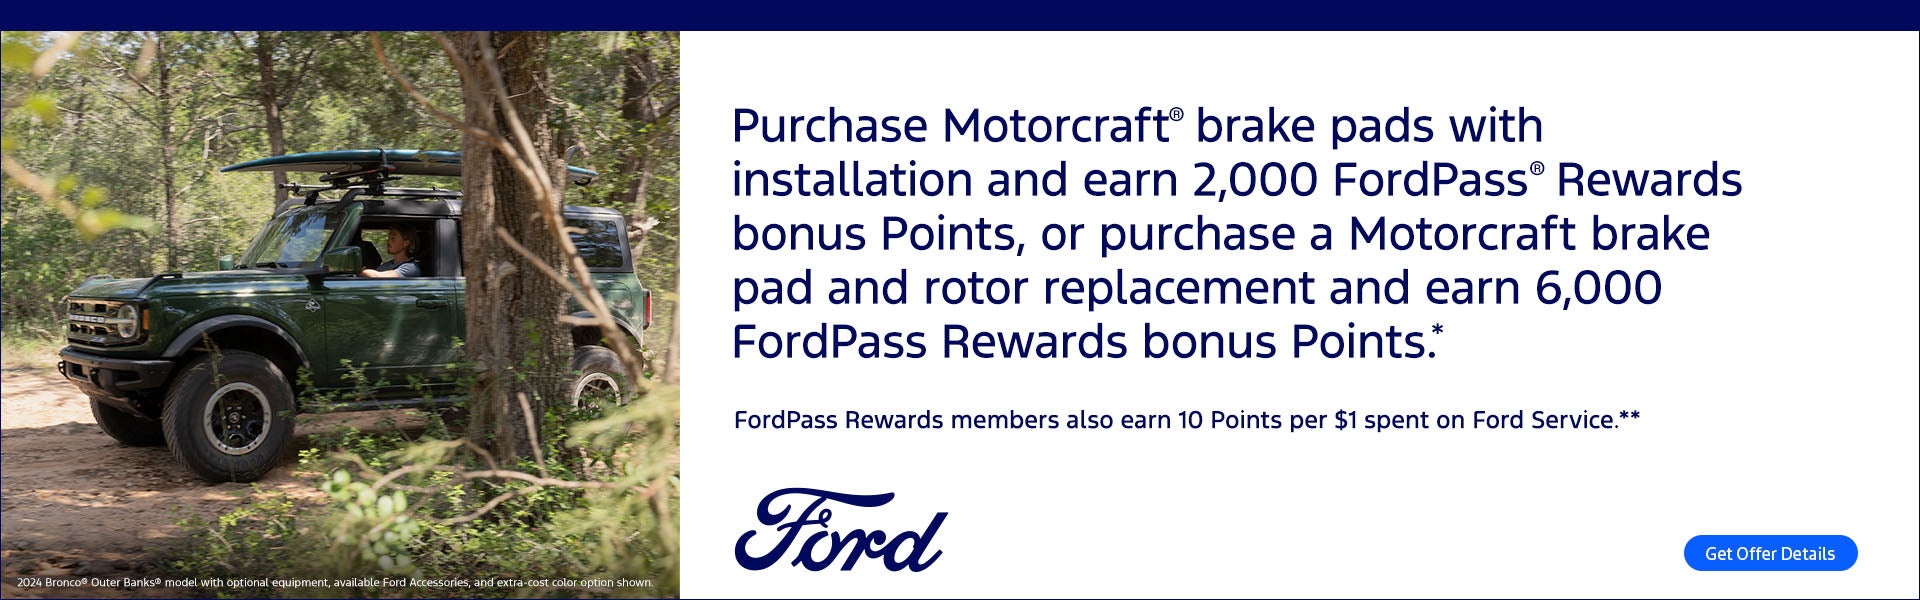 FordPass Rewards members also earn 10 Points per $1 spent on Ford Service.**